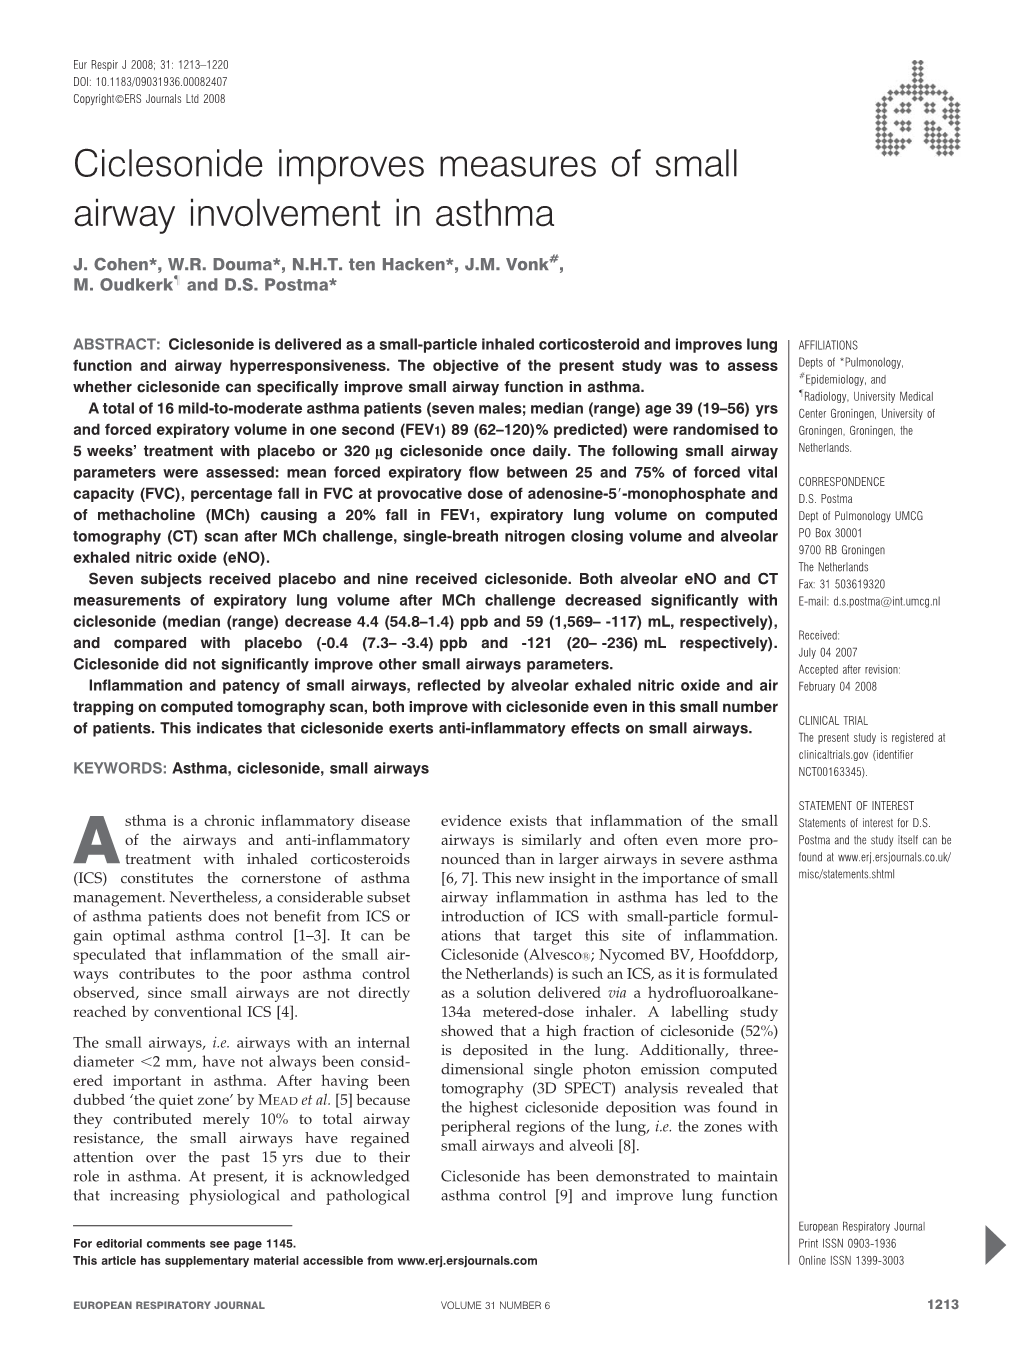 Ciclesonide Improves Measures of Small Airway Involvement in Asthma